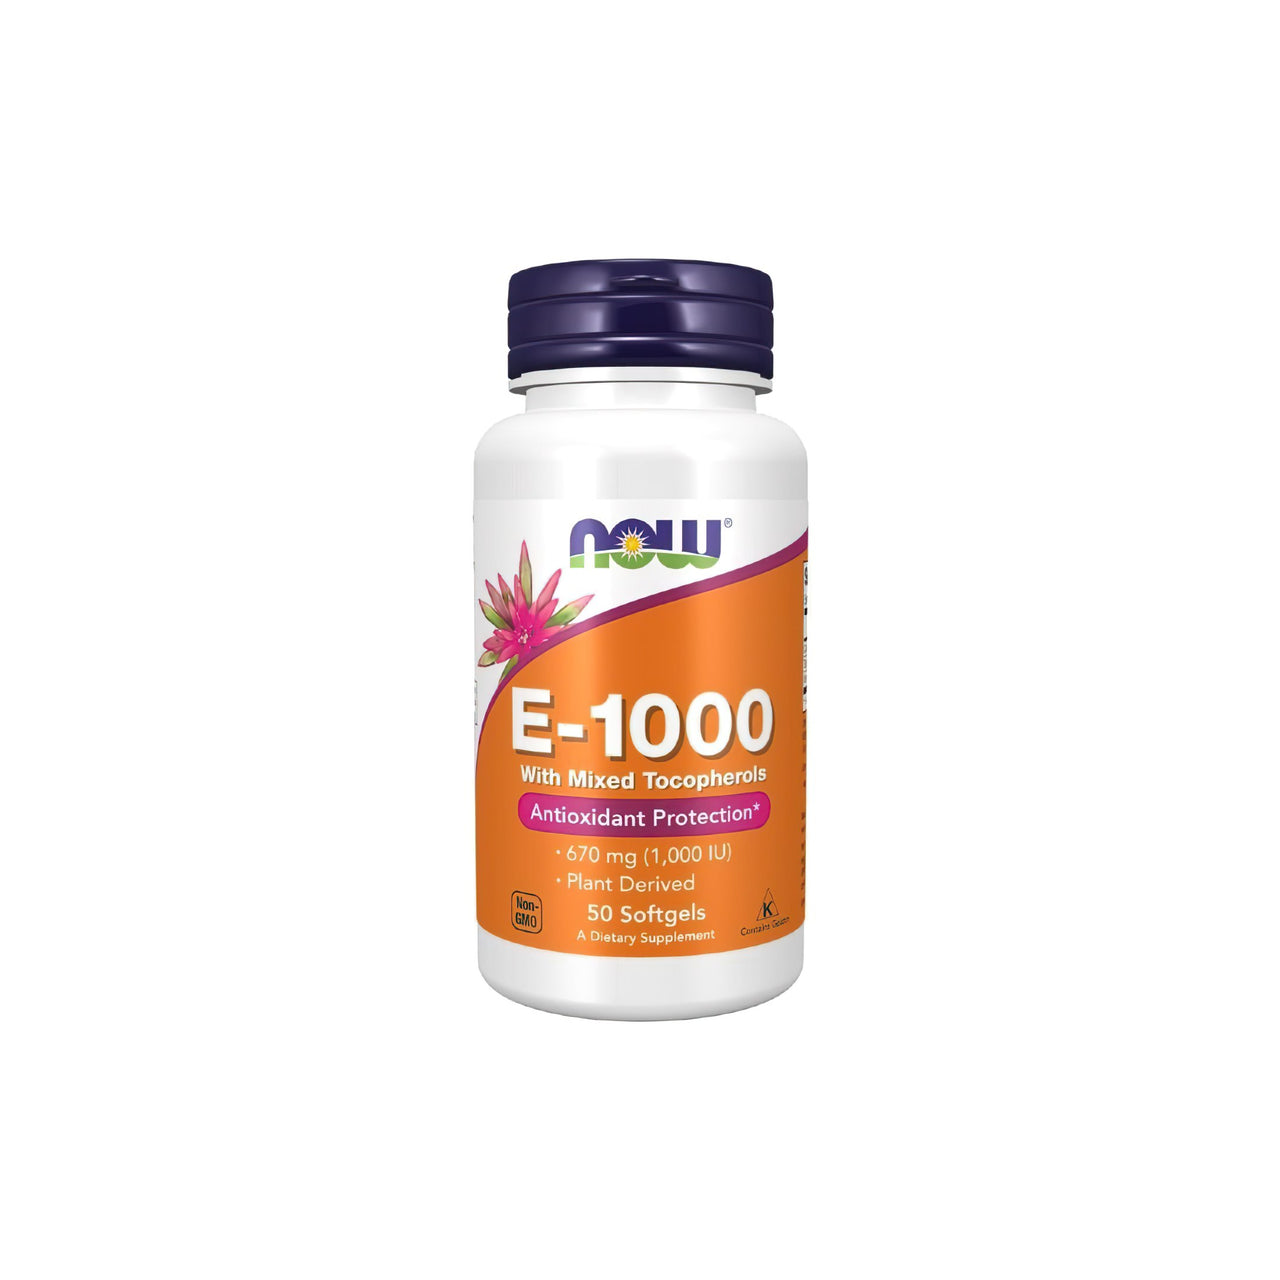 Now Foods Vitamin E-1000 Mixed Tocopherols 50 Softgels are a natural antioxidant that can help combat skin ageing.